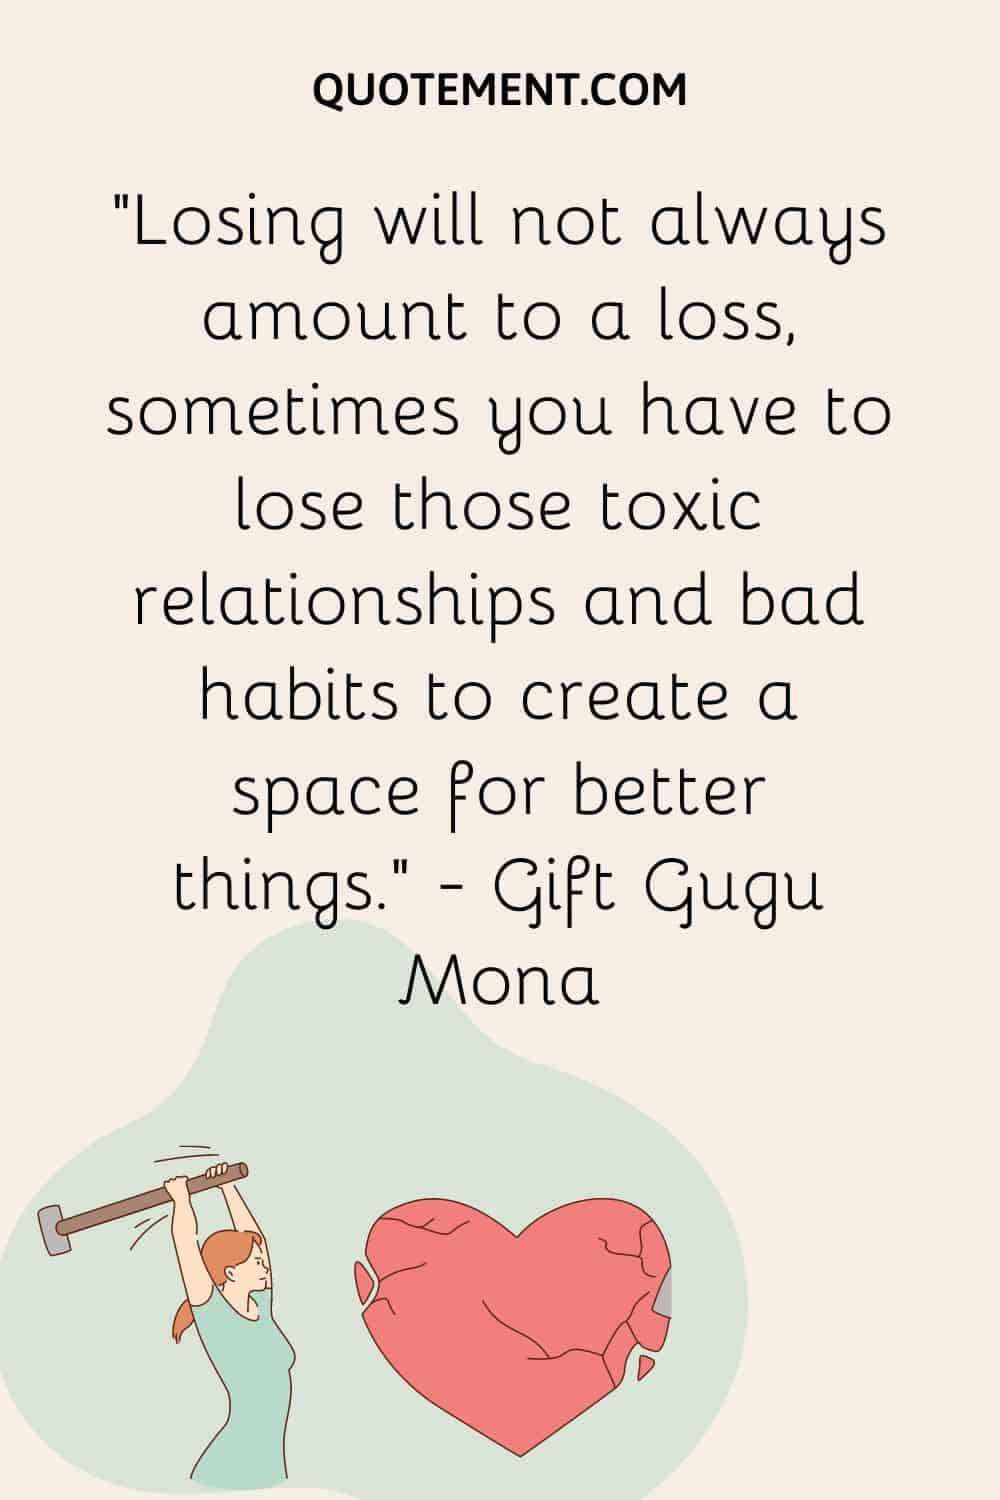 Losing will not always amount to a loss, sometimes you have to lose those toxic relationships and bad habits to create a space for better things